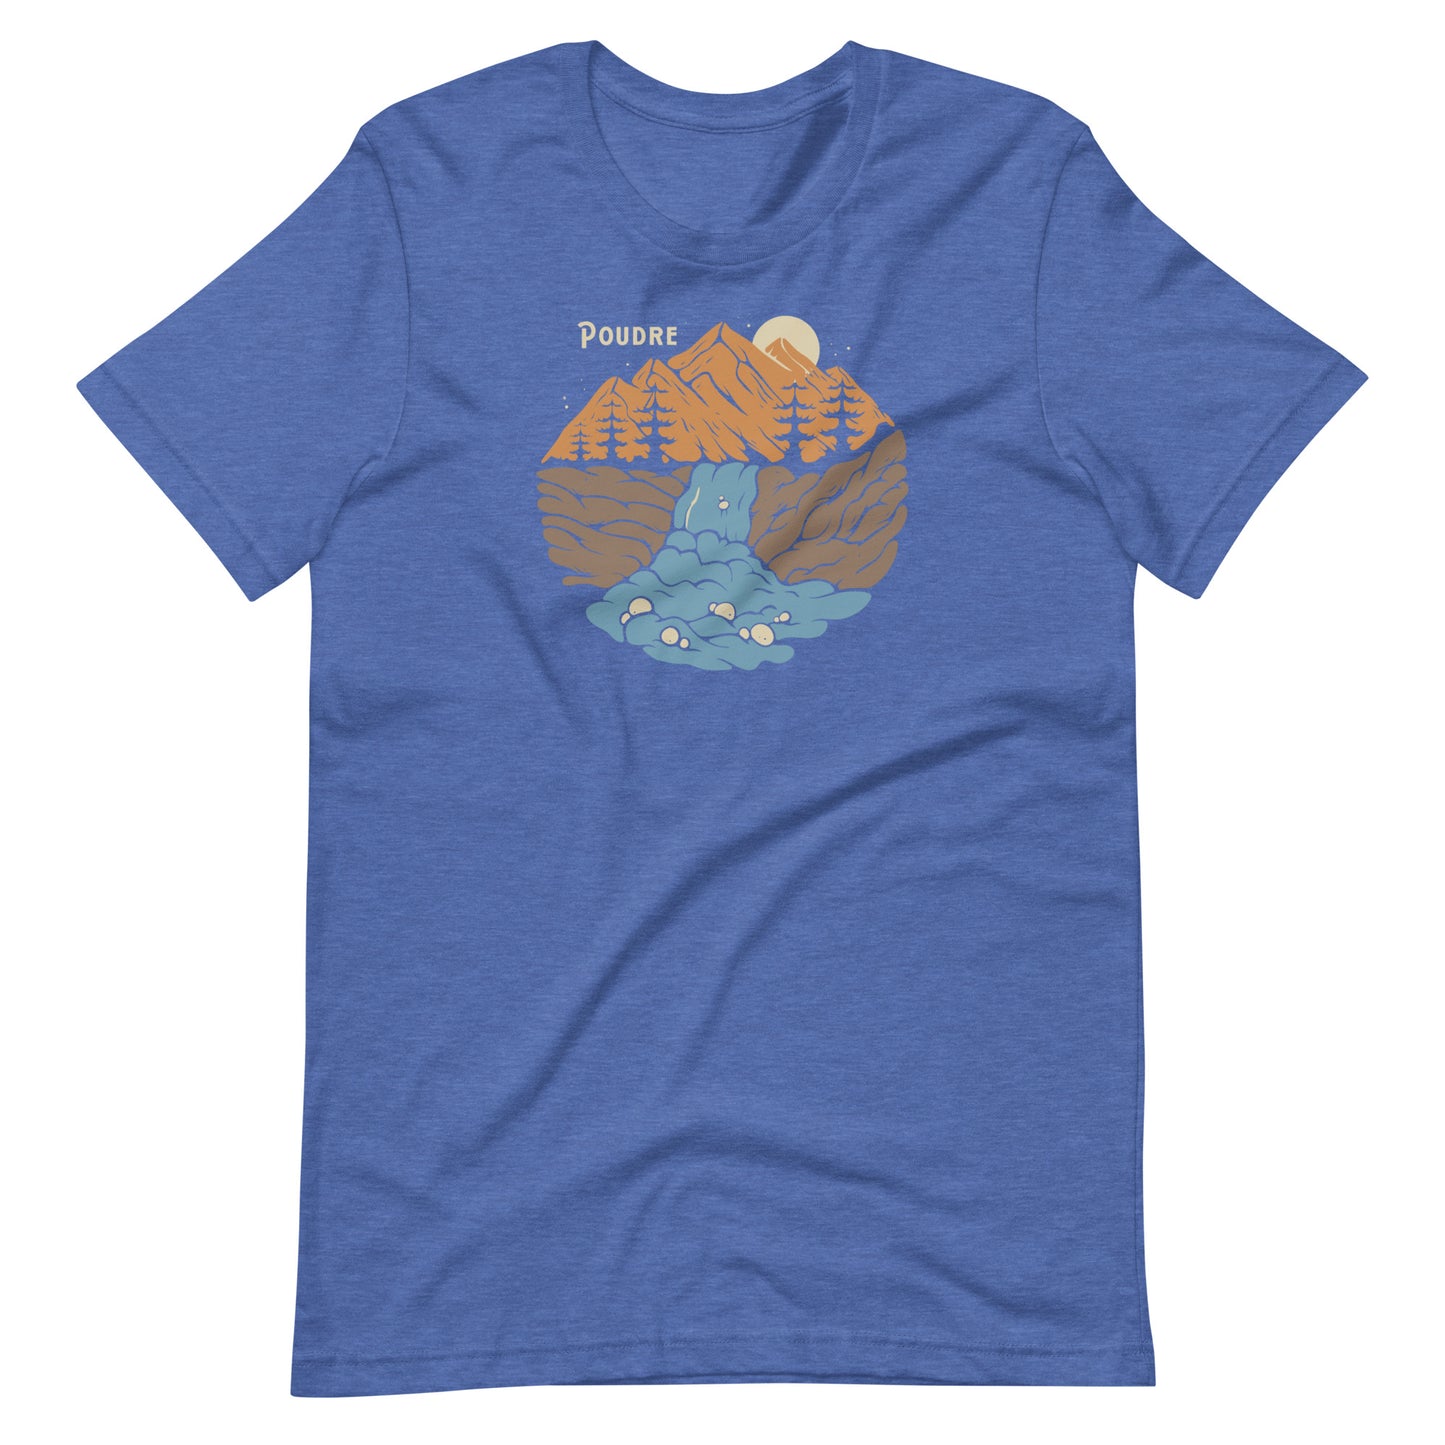 High-quality Bella Canvas 3001 t-shirt, imprinted with a graphic of the scenic Poudre River, celebrating Colorado's stunning landscapes.